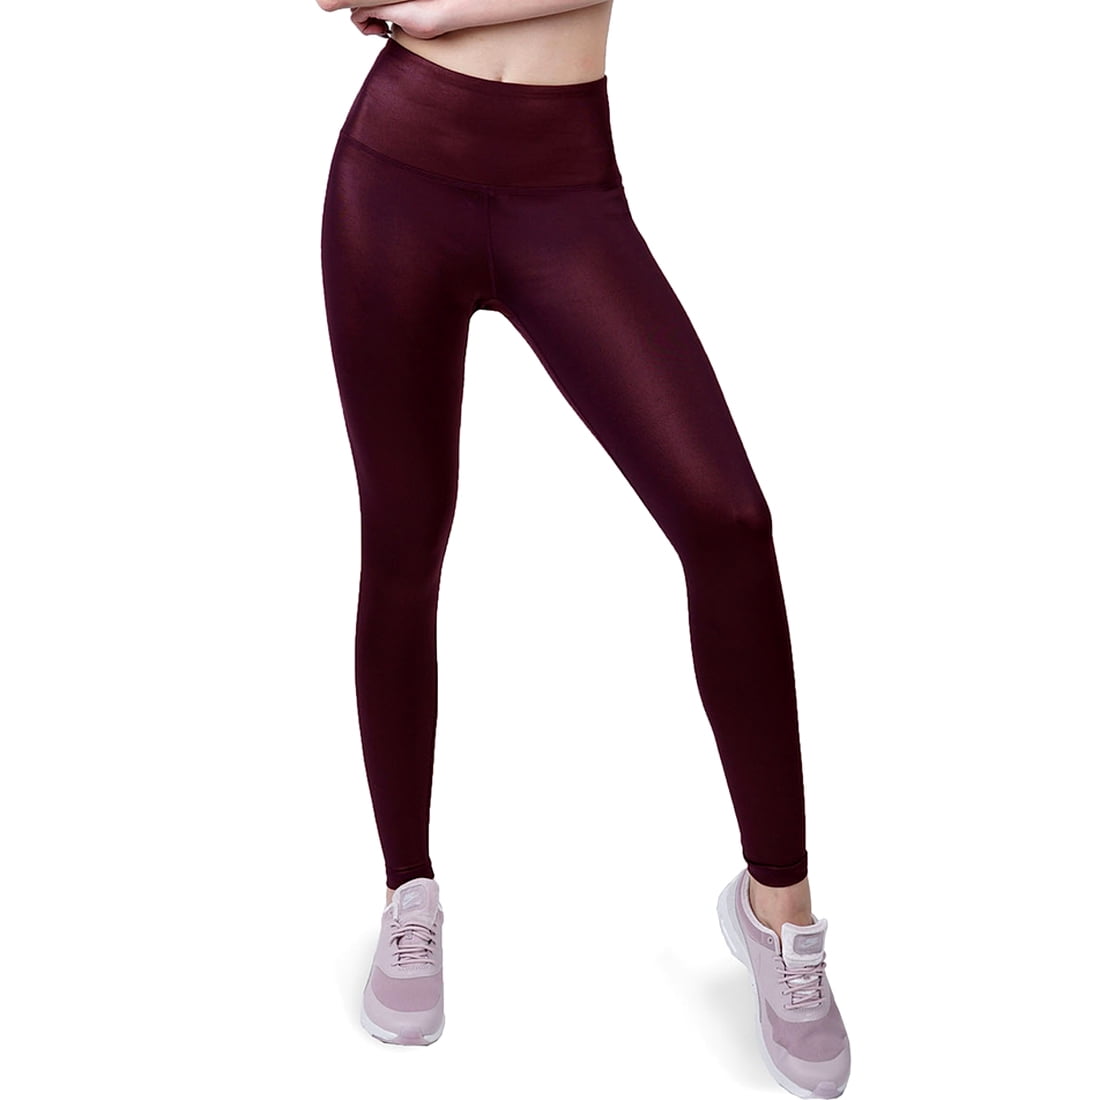 leggings-yoga pants, out and about, los angeles, gym, new york,  shopping,-240122_11